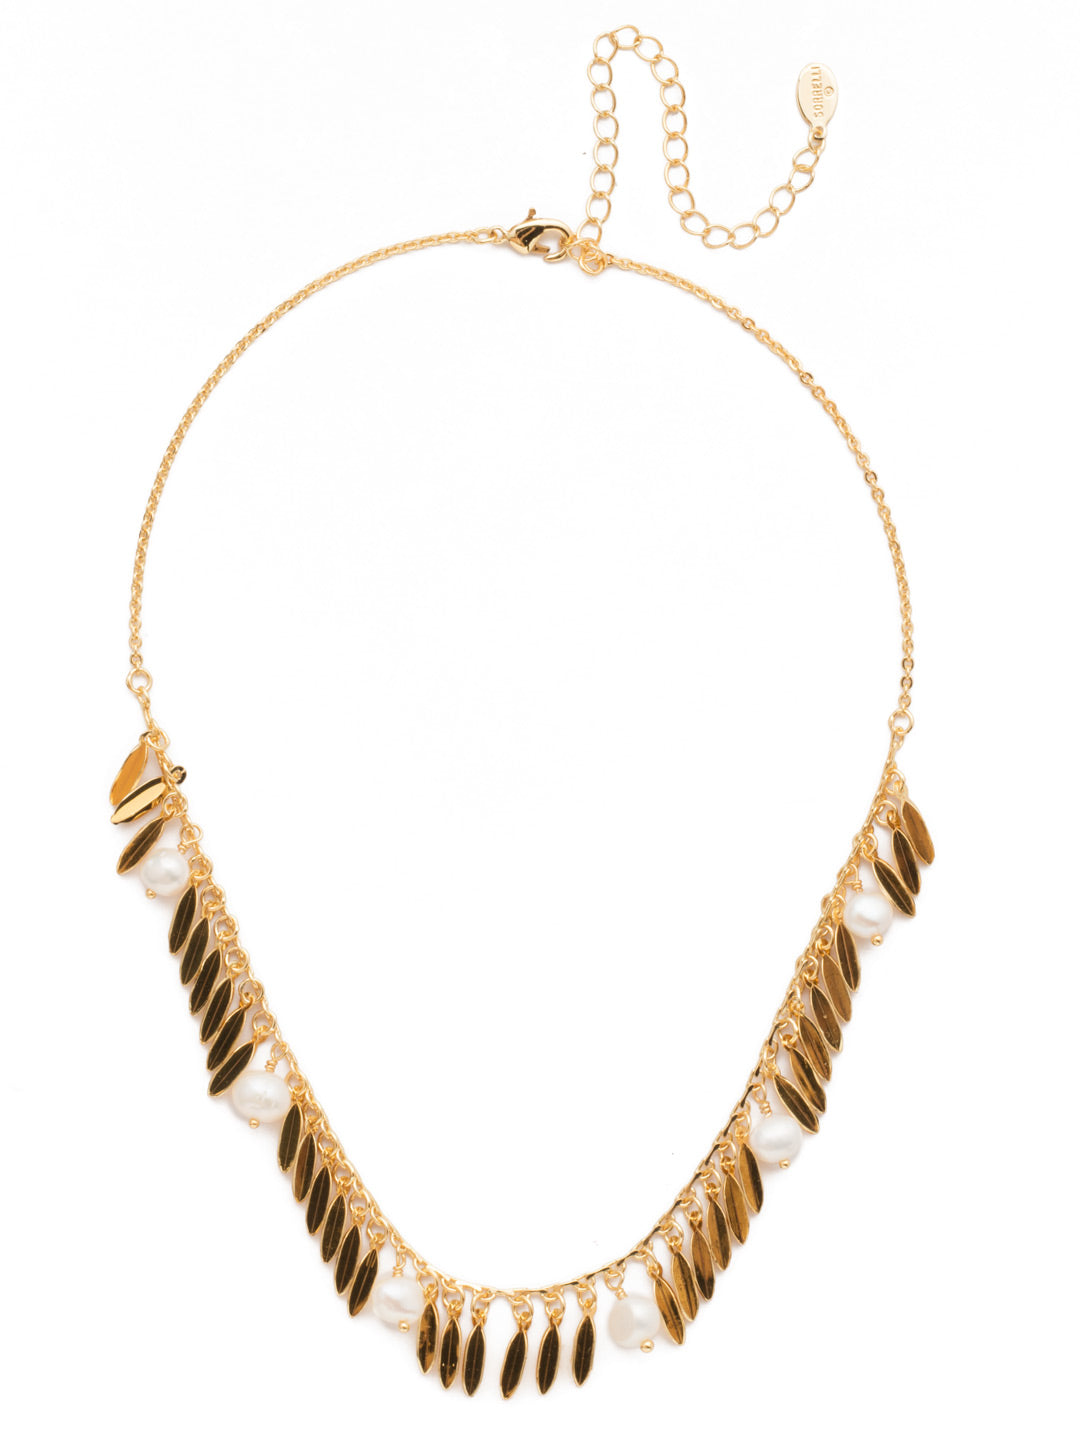 Twyla Tennis Necklace - 4NES8BGMDP - <p>Throw on some metallic fringe in our Twyla Tennis Necklace. This fun piece adds a touch of class with dots of pretty pearls. From Sorrelli's Modern Pearl collection in our Bright Gold-tone finish.</p>